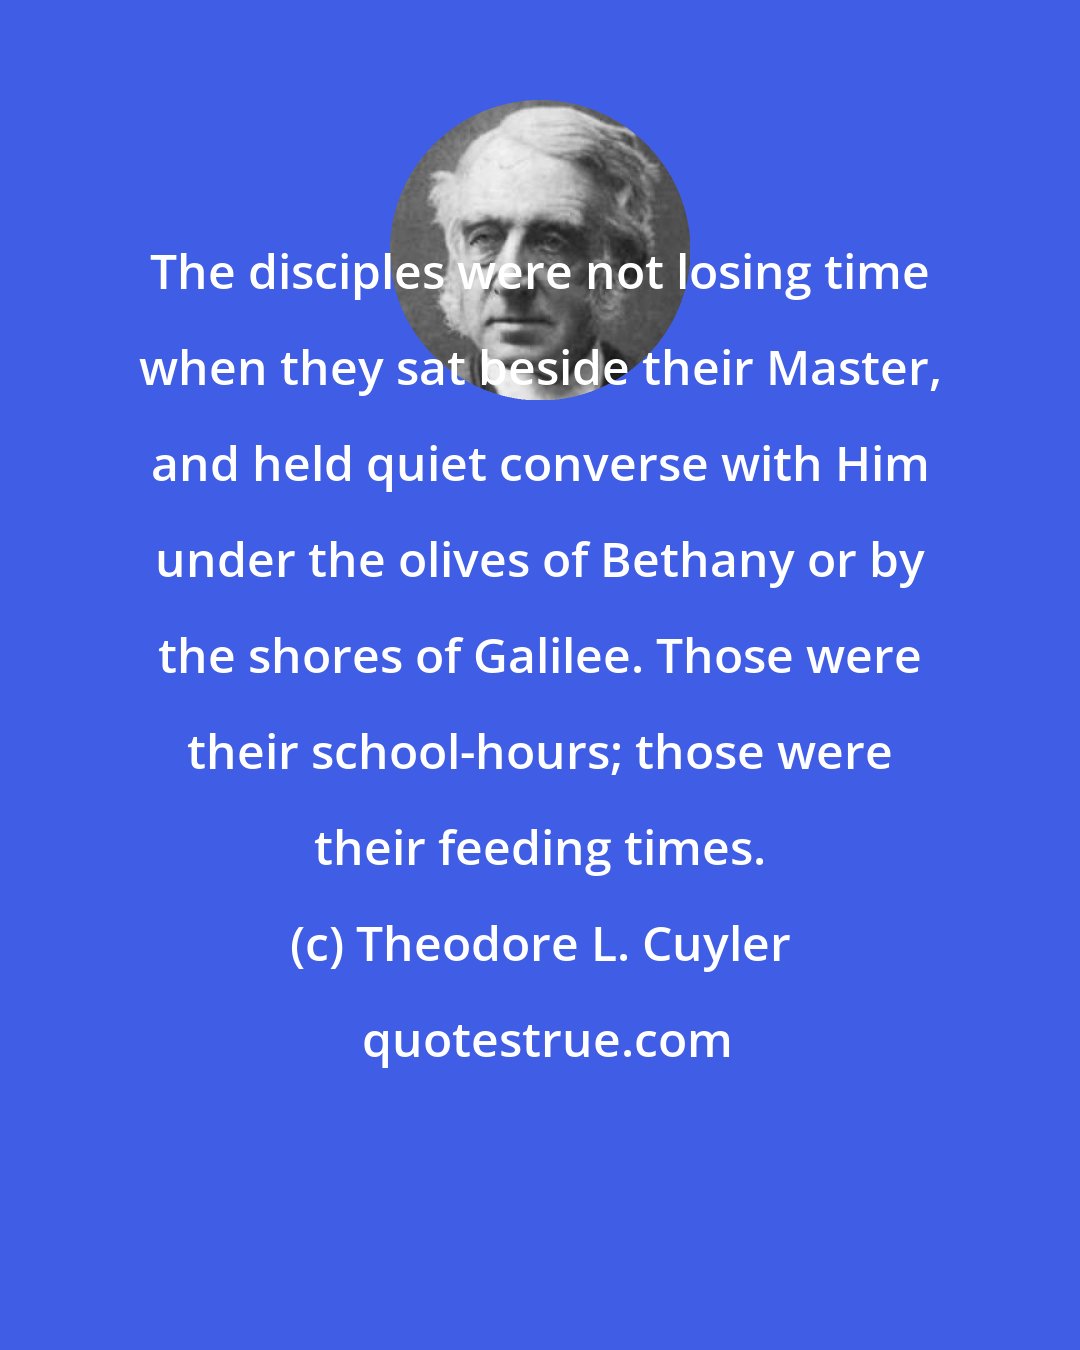 Theodore L. Cuyler: The disciples were not losing time when they sat beside their Master, and held quiet converse with Him under the olives of Bethany or by the shores of Galilee. Those were their school-hours; those were their feeding times.